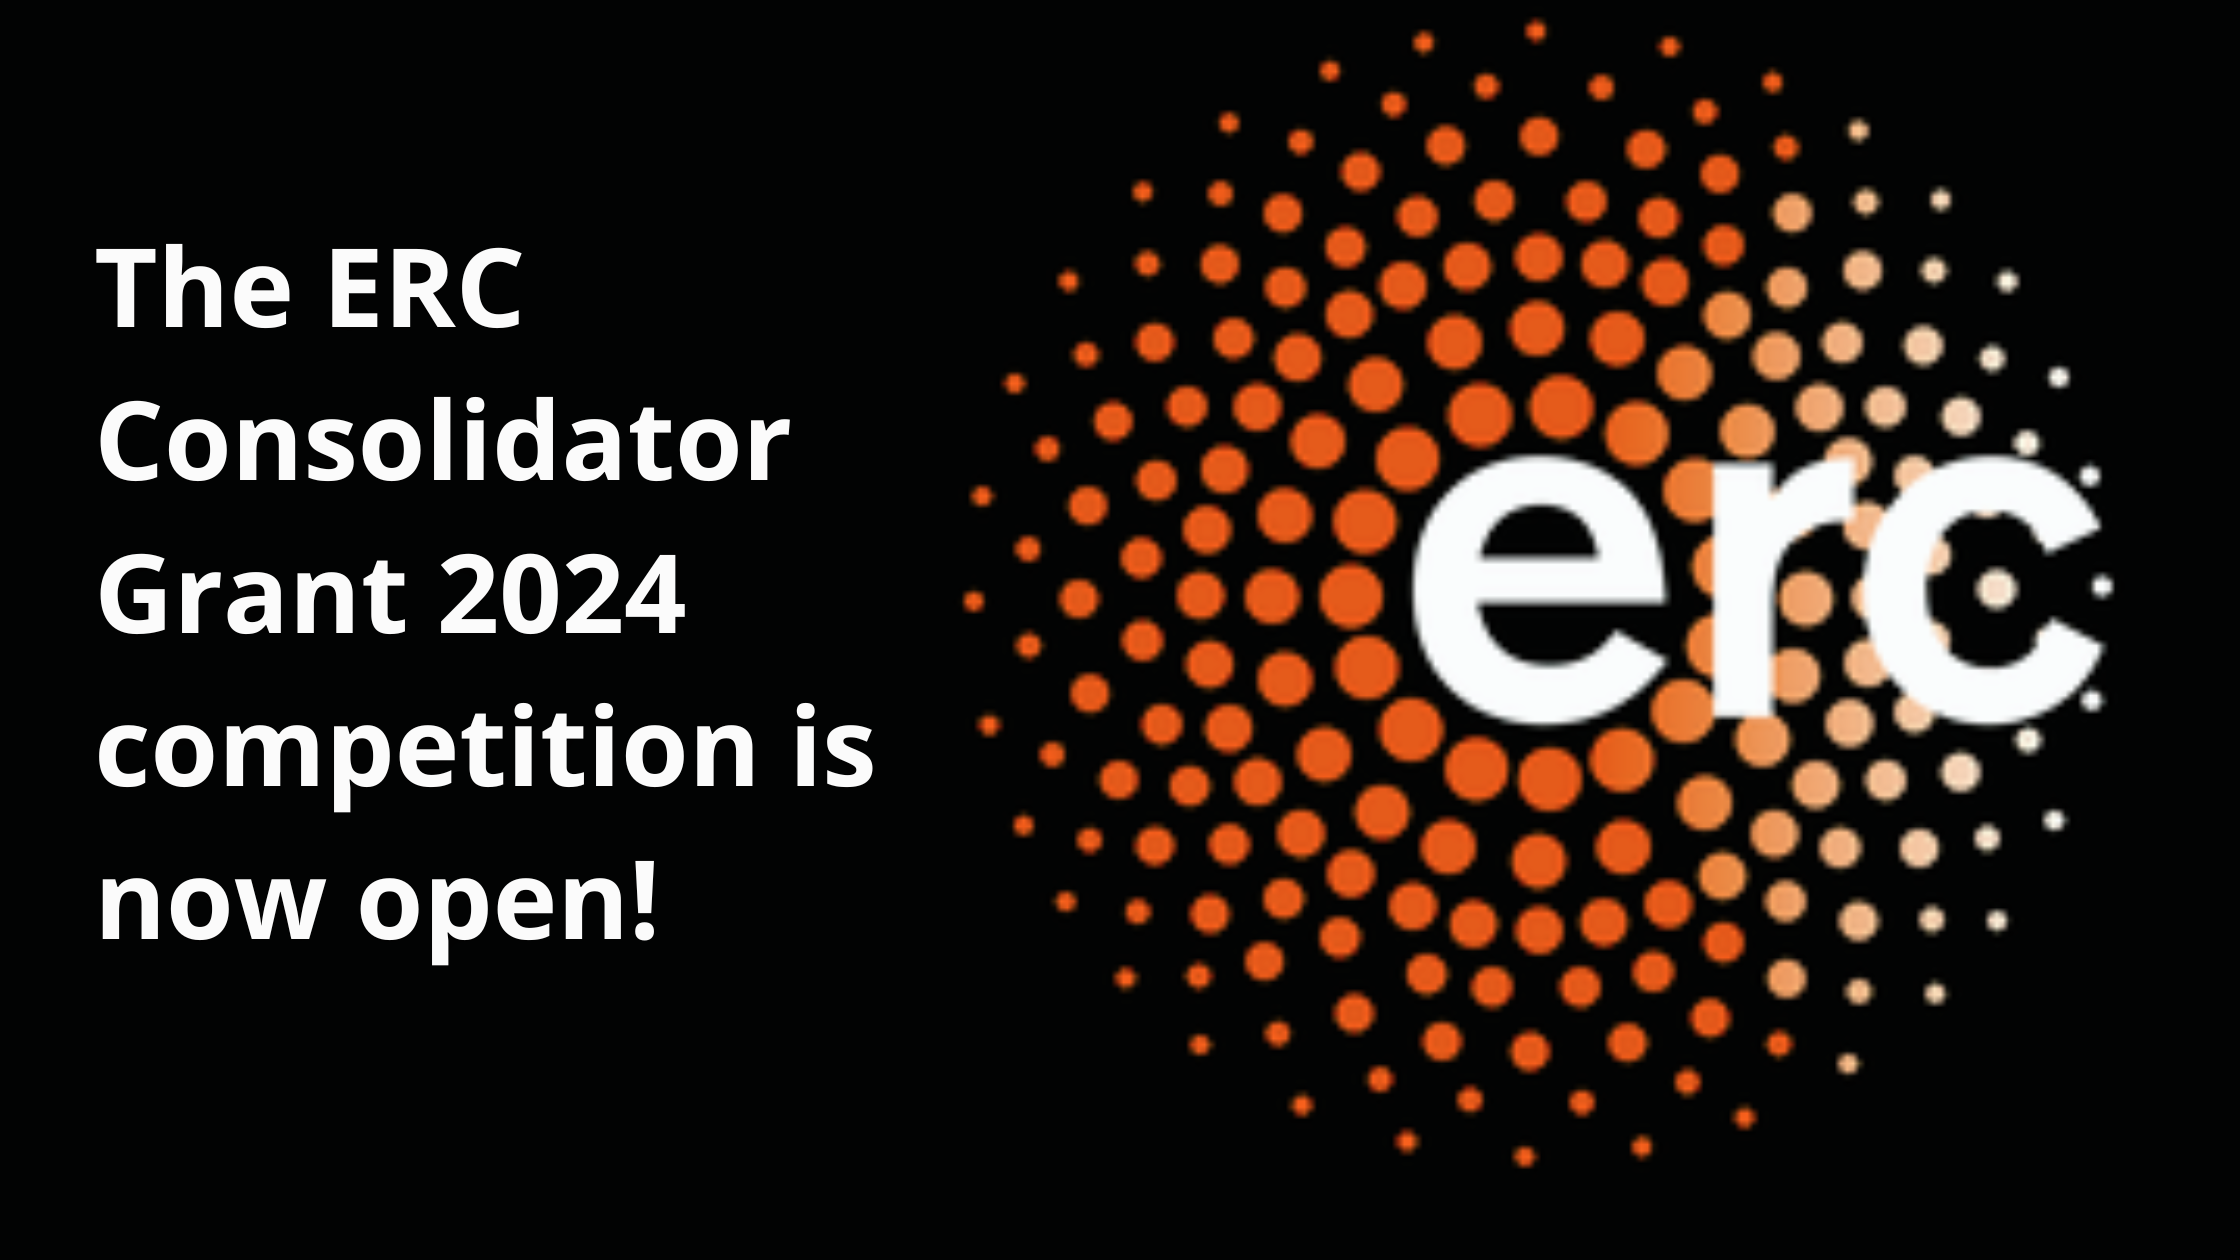 The ERC Consolidator Grant 2024 competition is now open EURAXESS